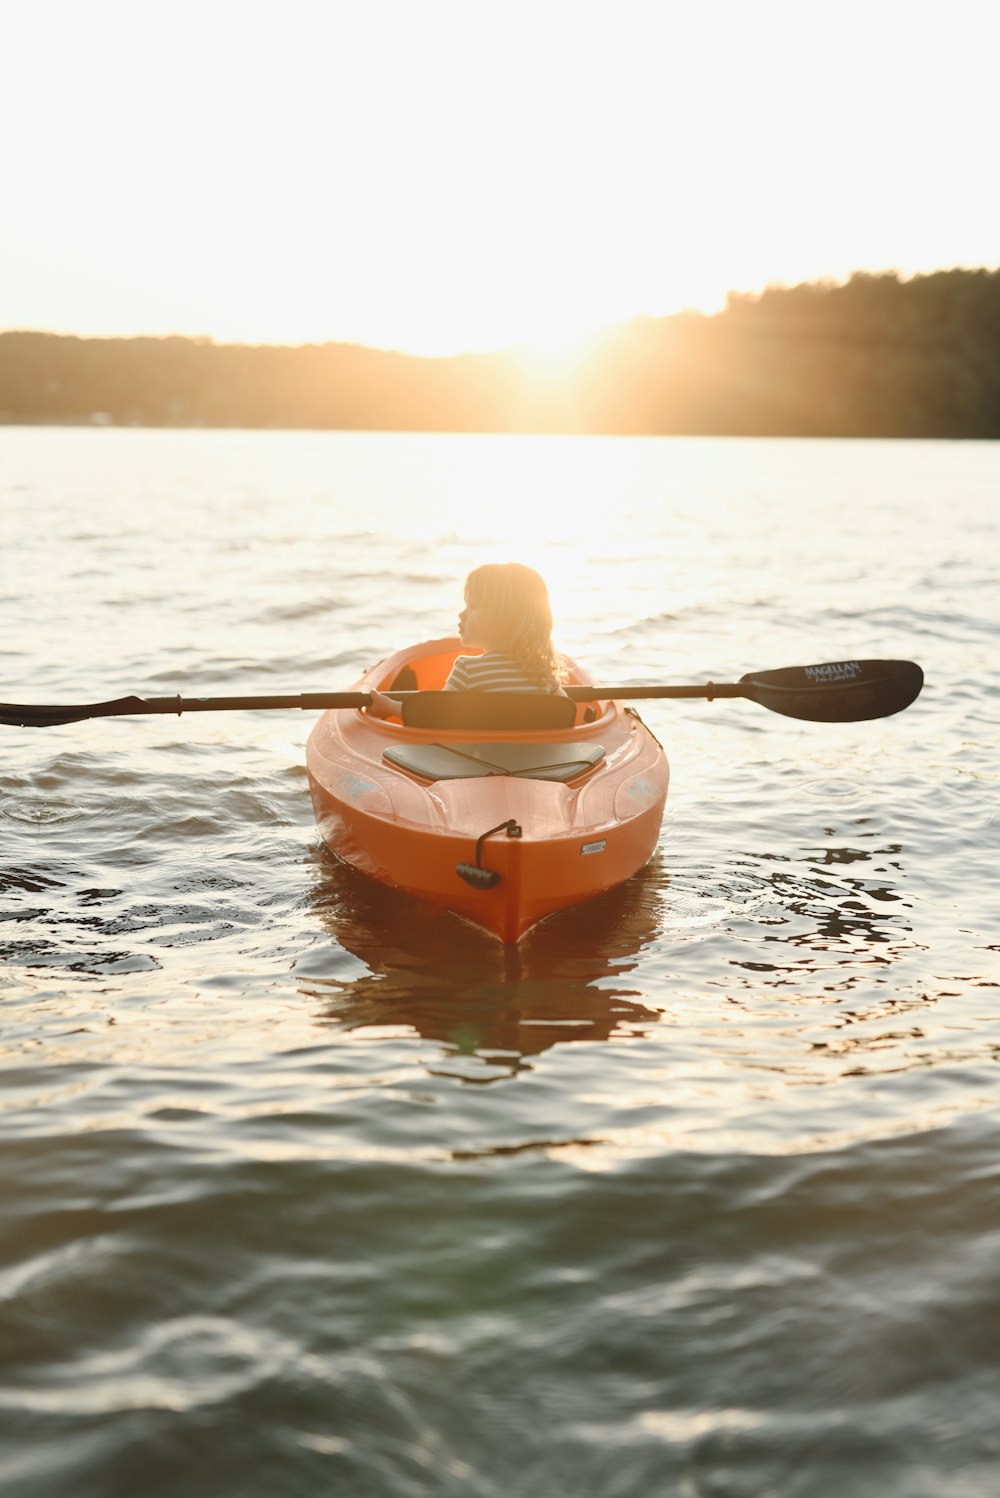 woman in yellow kayak on body of water during daytime